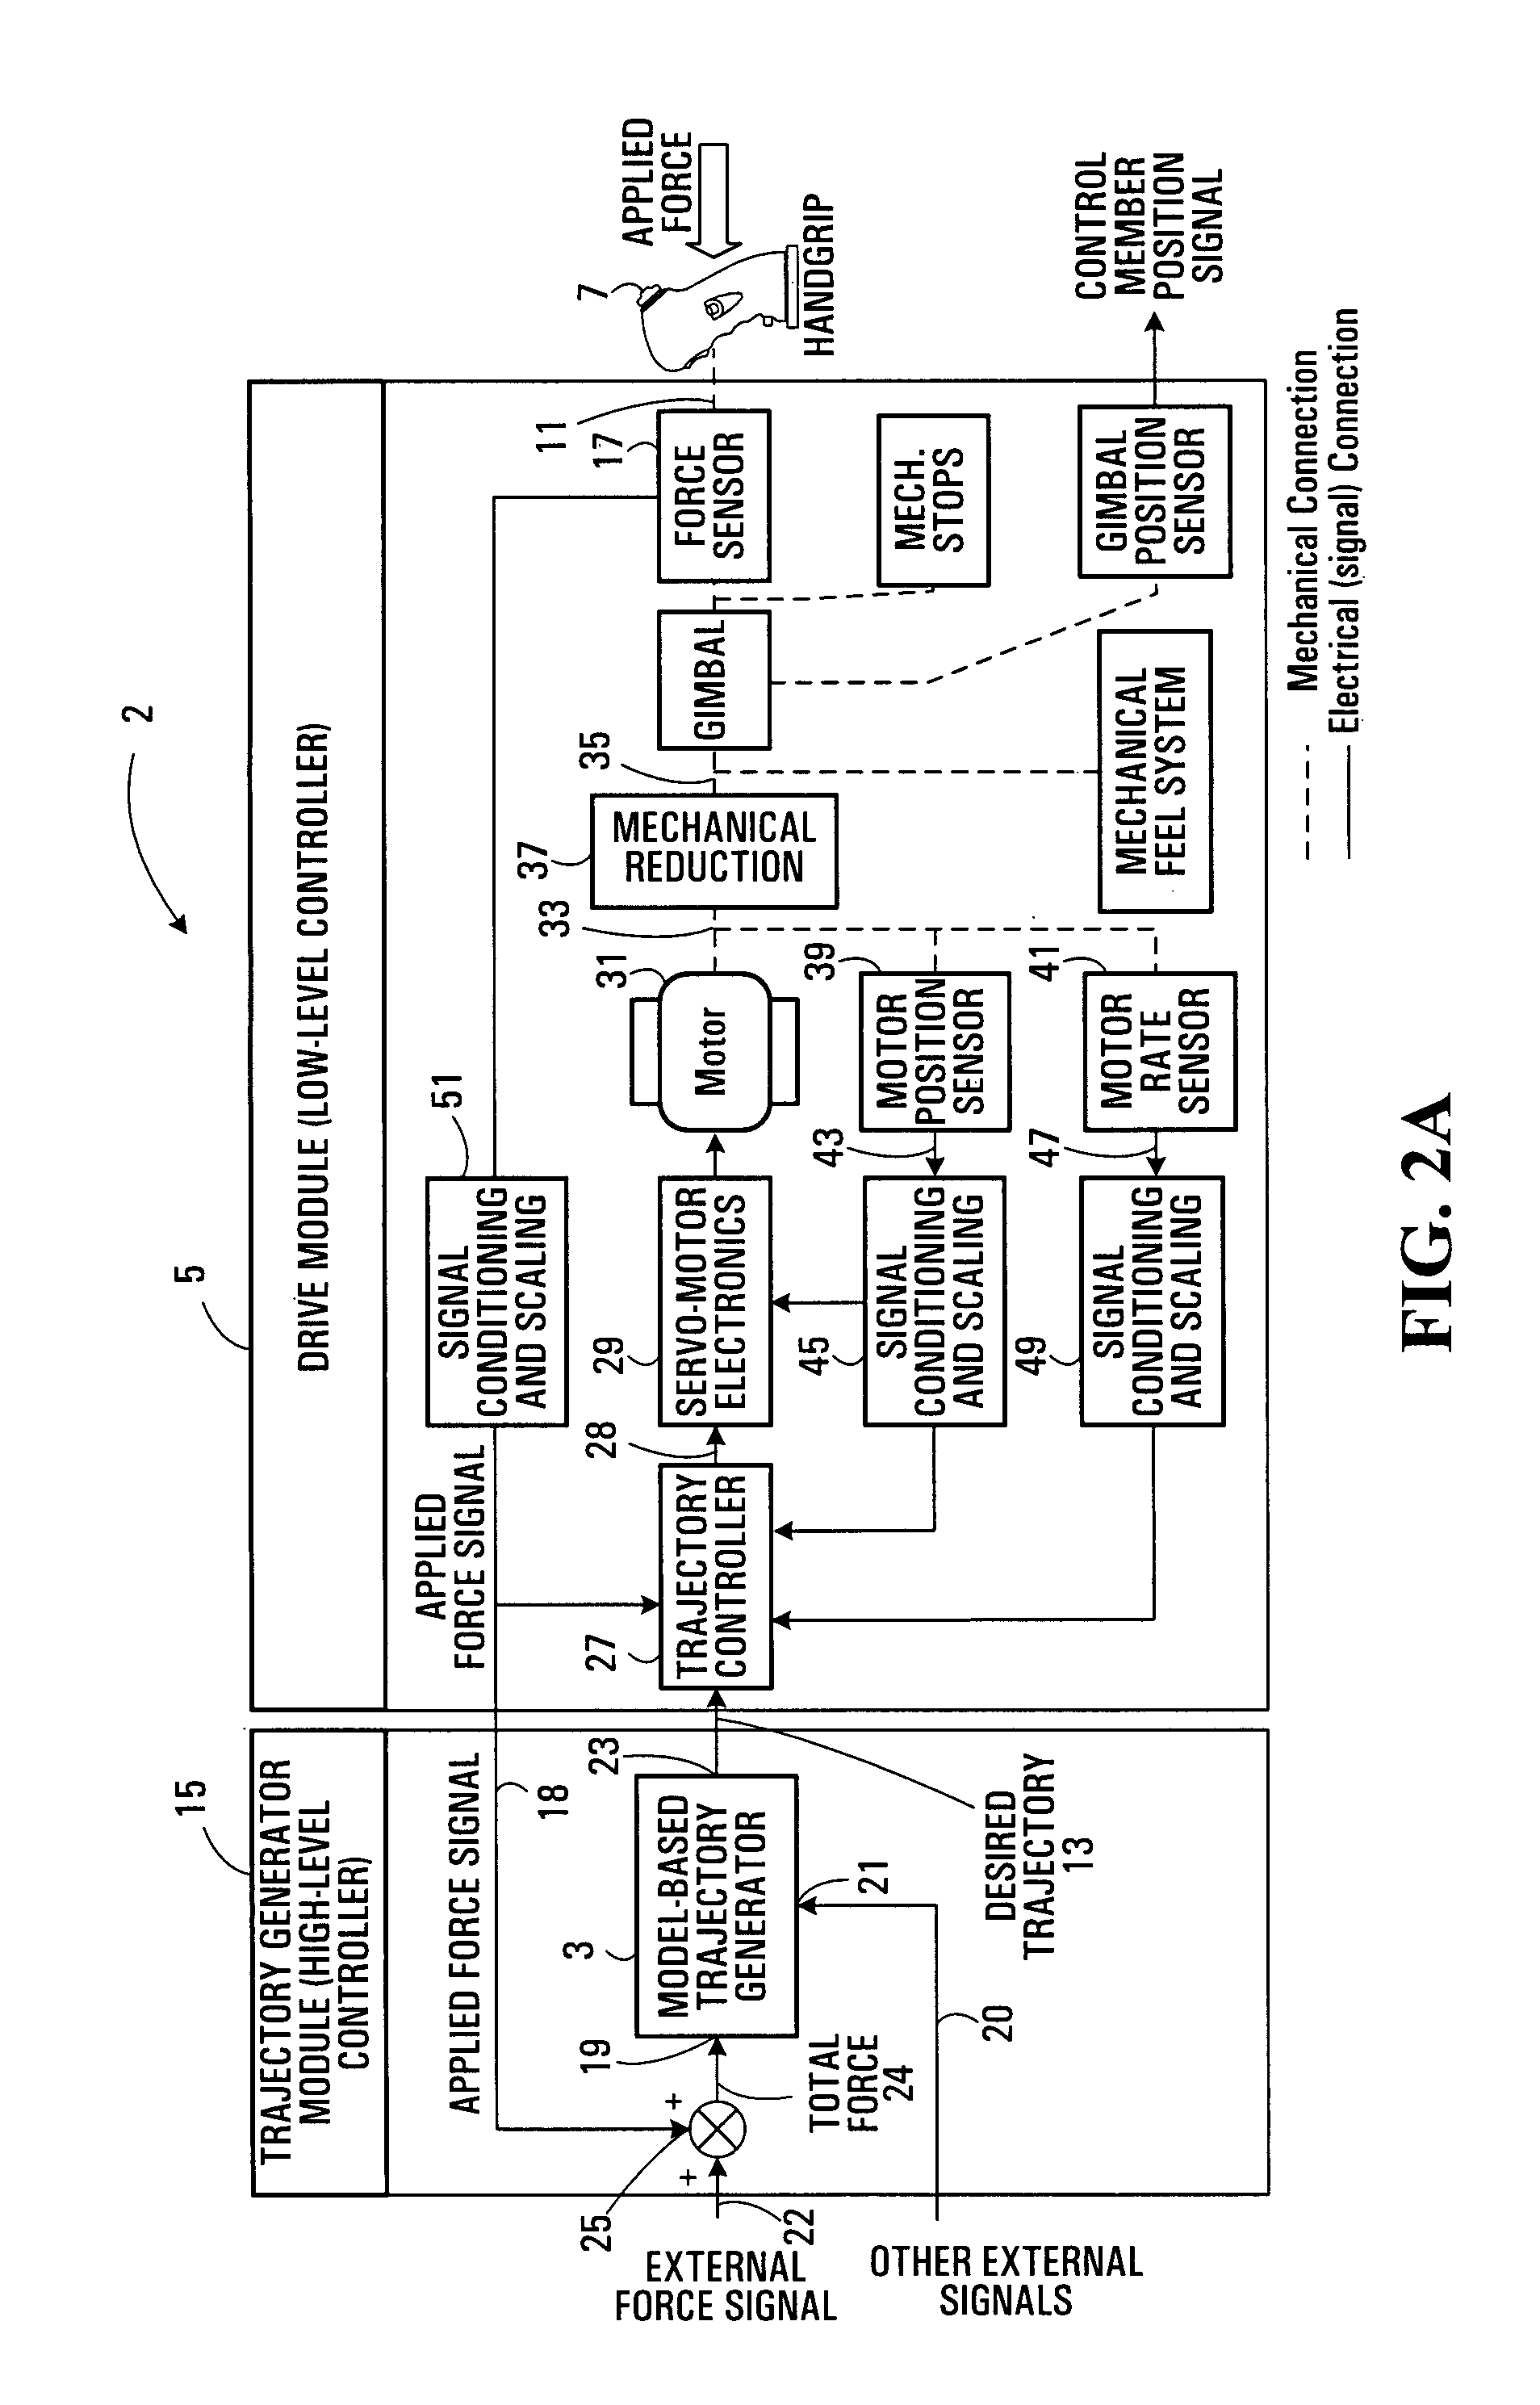 Apparatus and method for controlling a force-activated controller